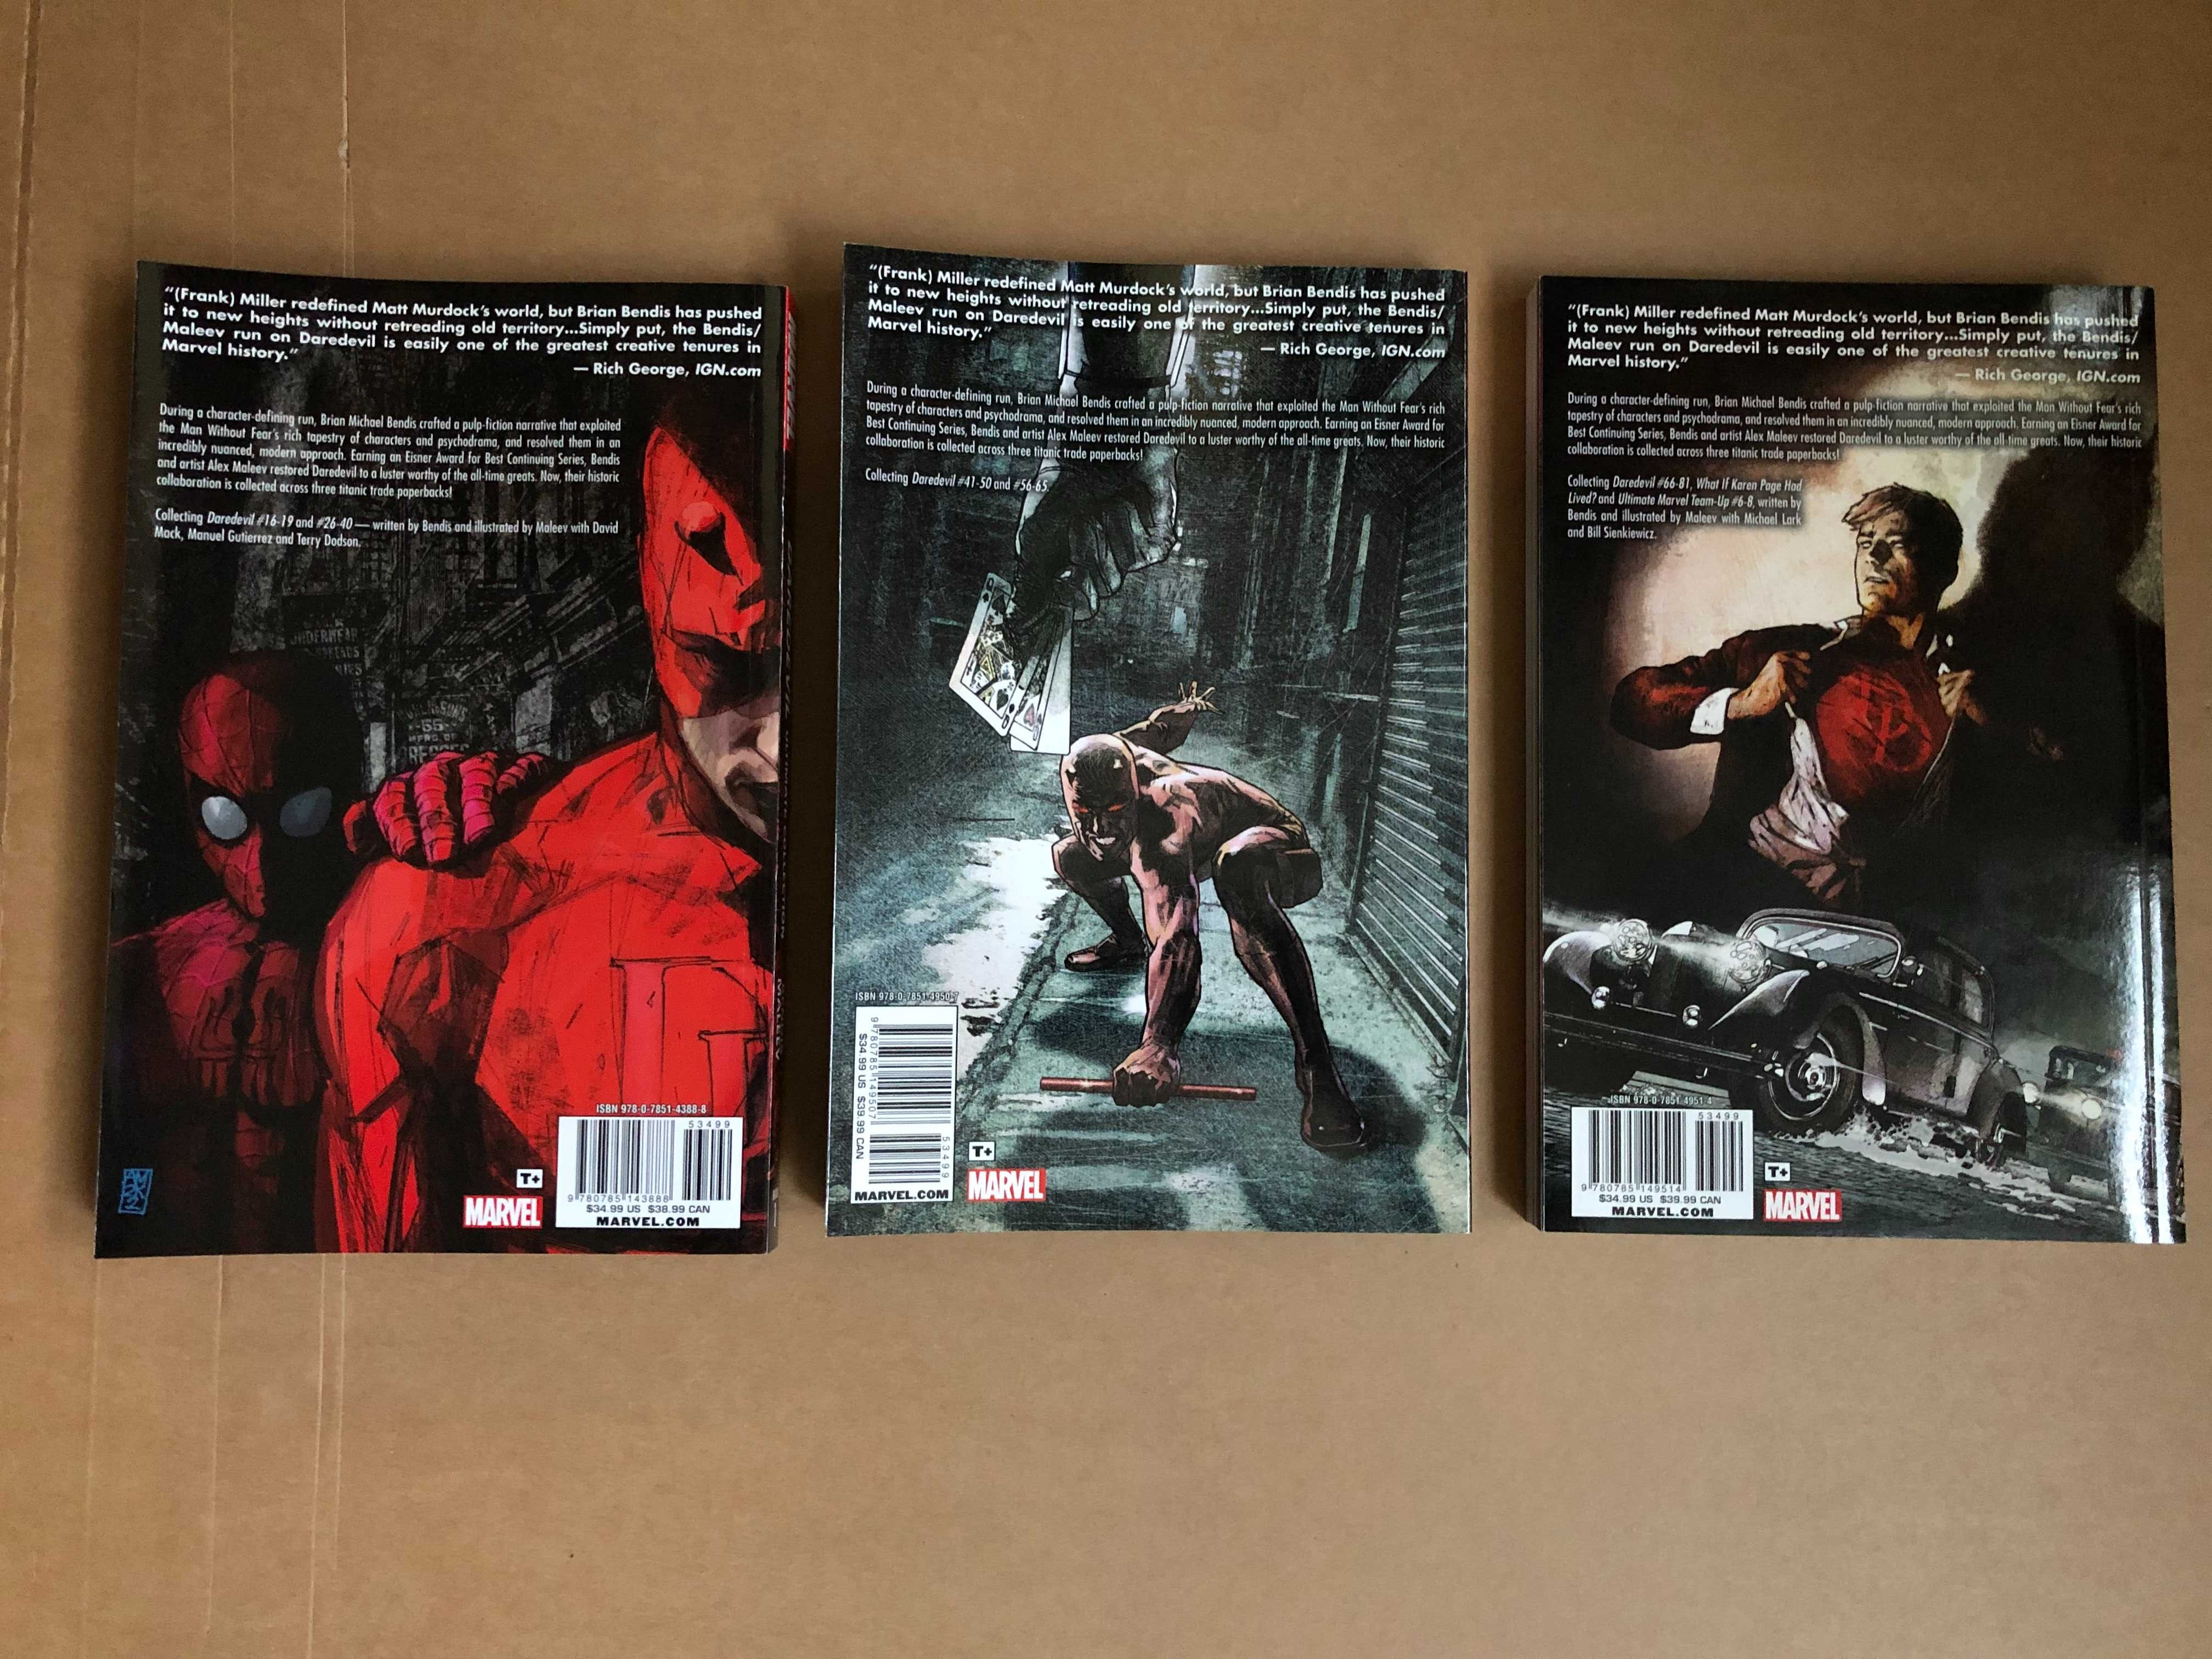 DAREDEVIL by BENDIS & ALEX MALEEV Ultimate collections Marvel comics